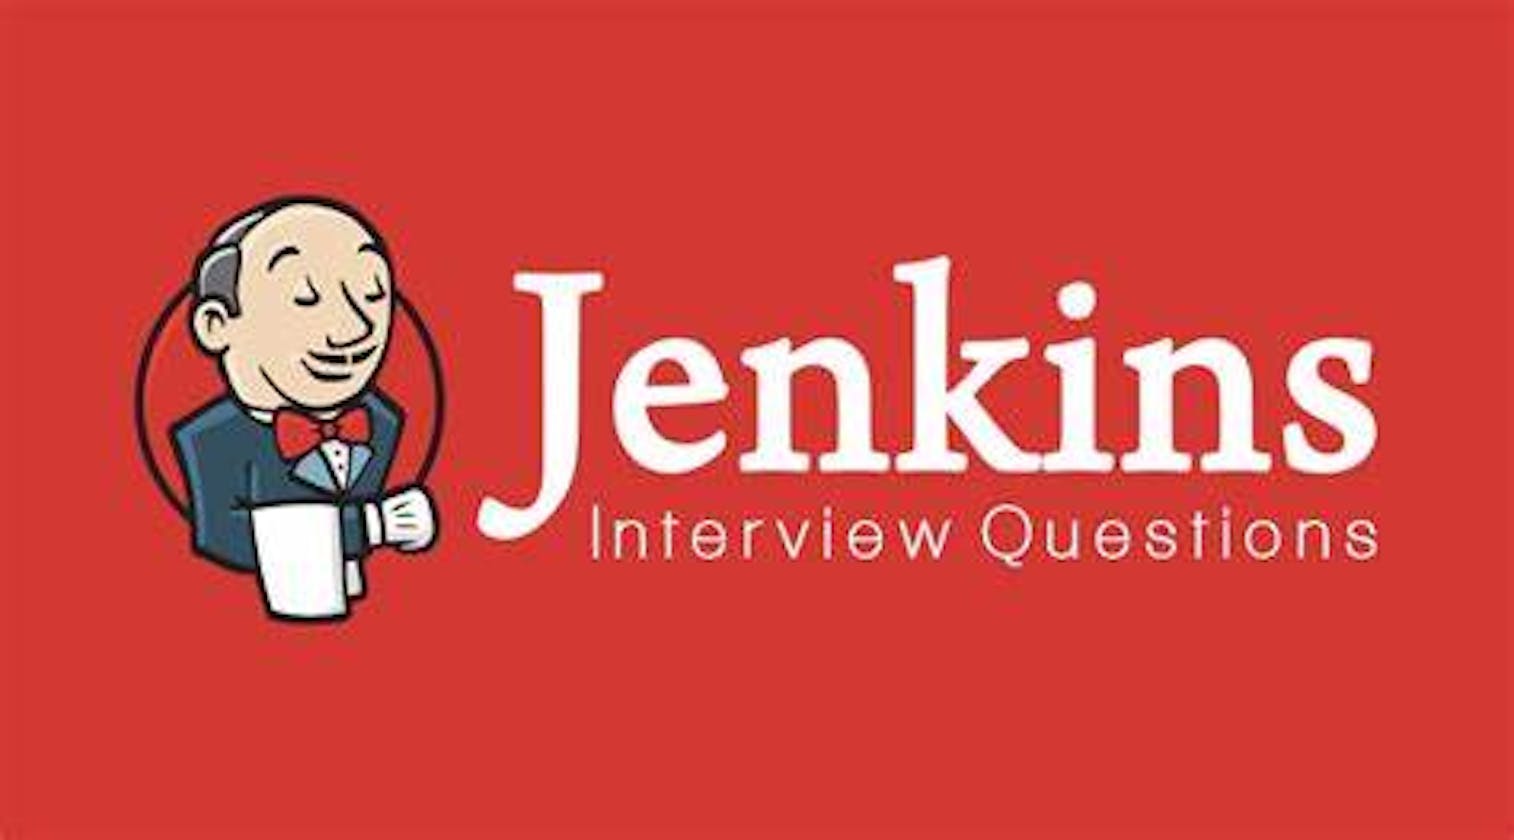 Day 29 Task: Jenkins Important interview Questions